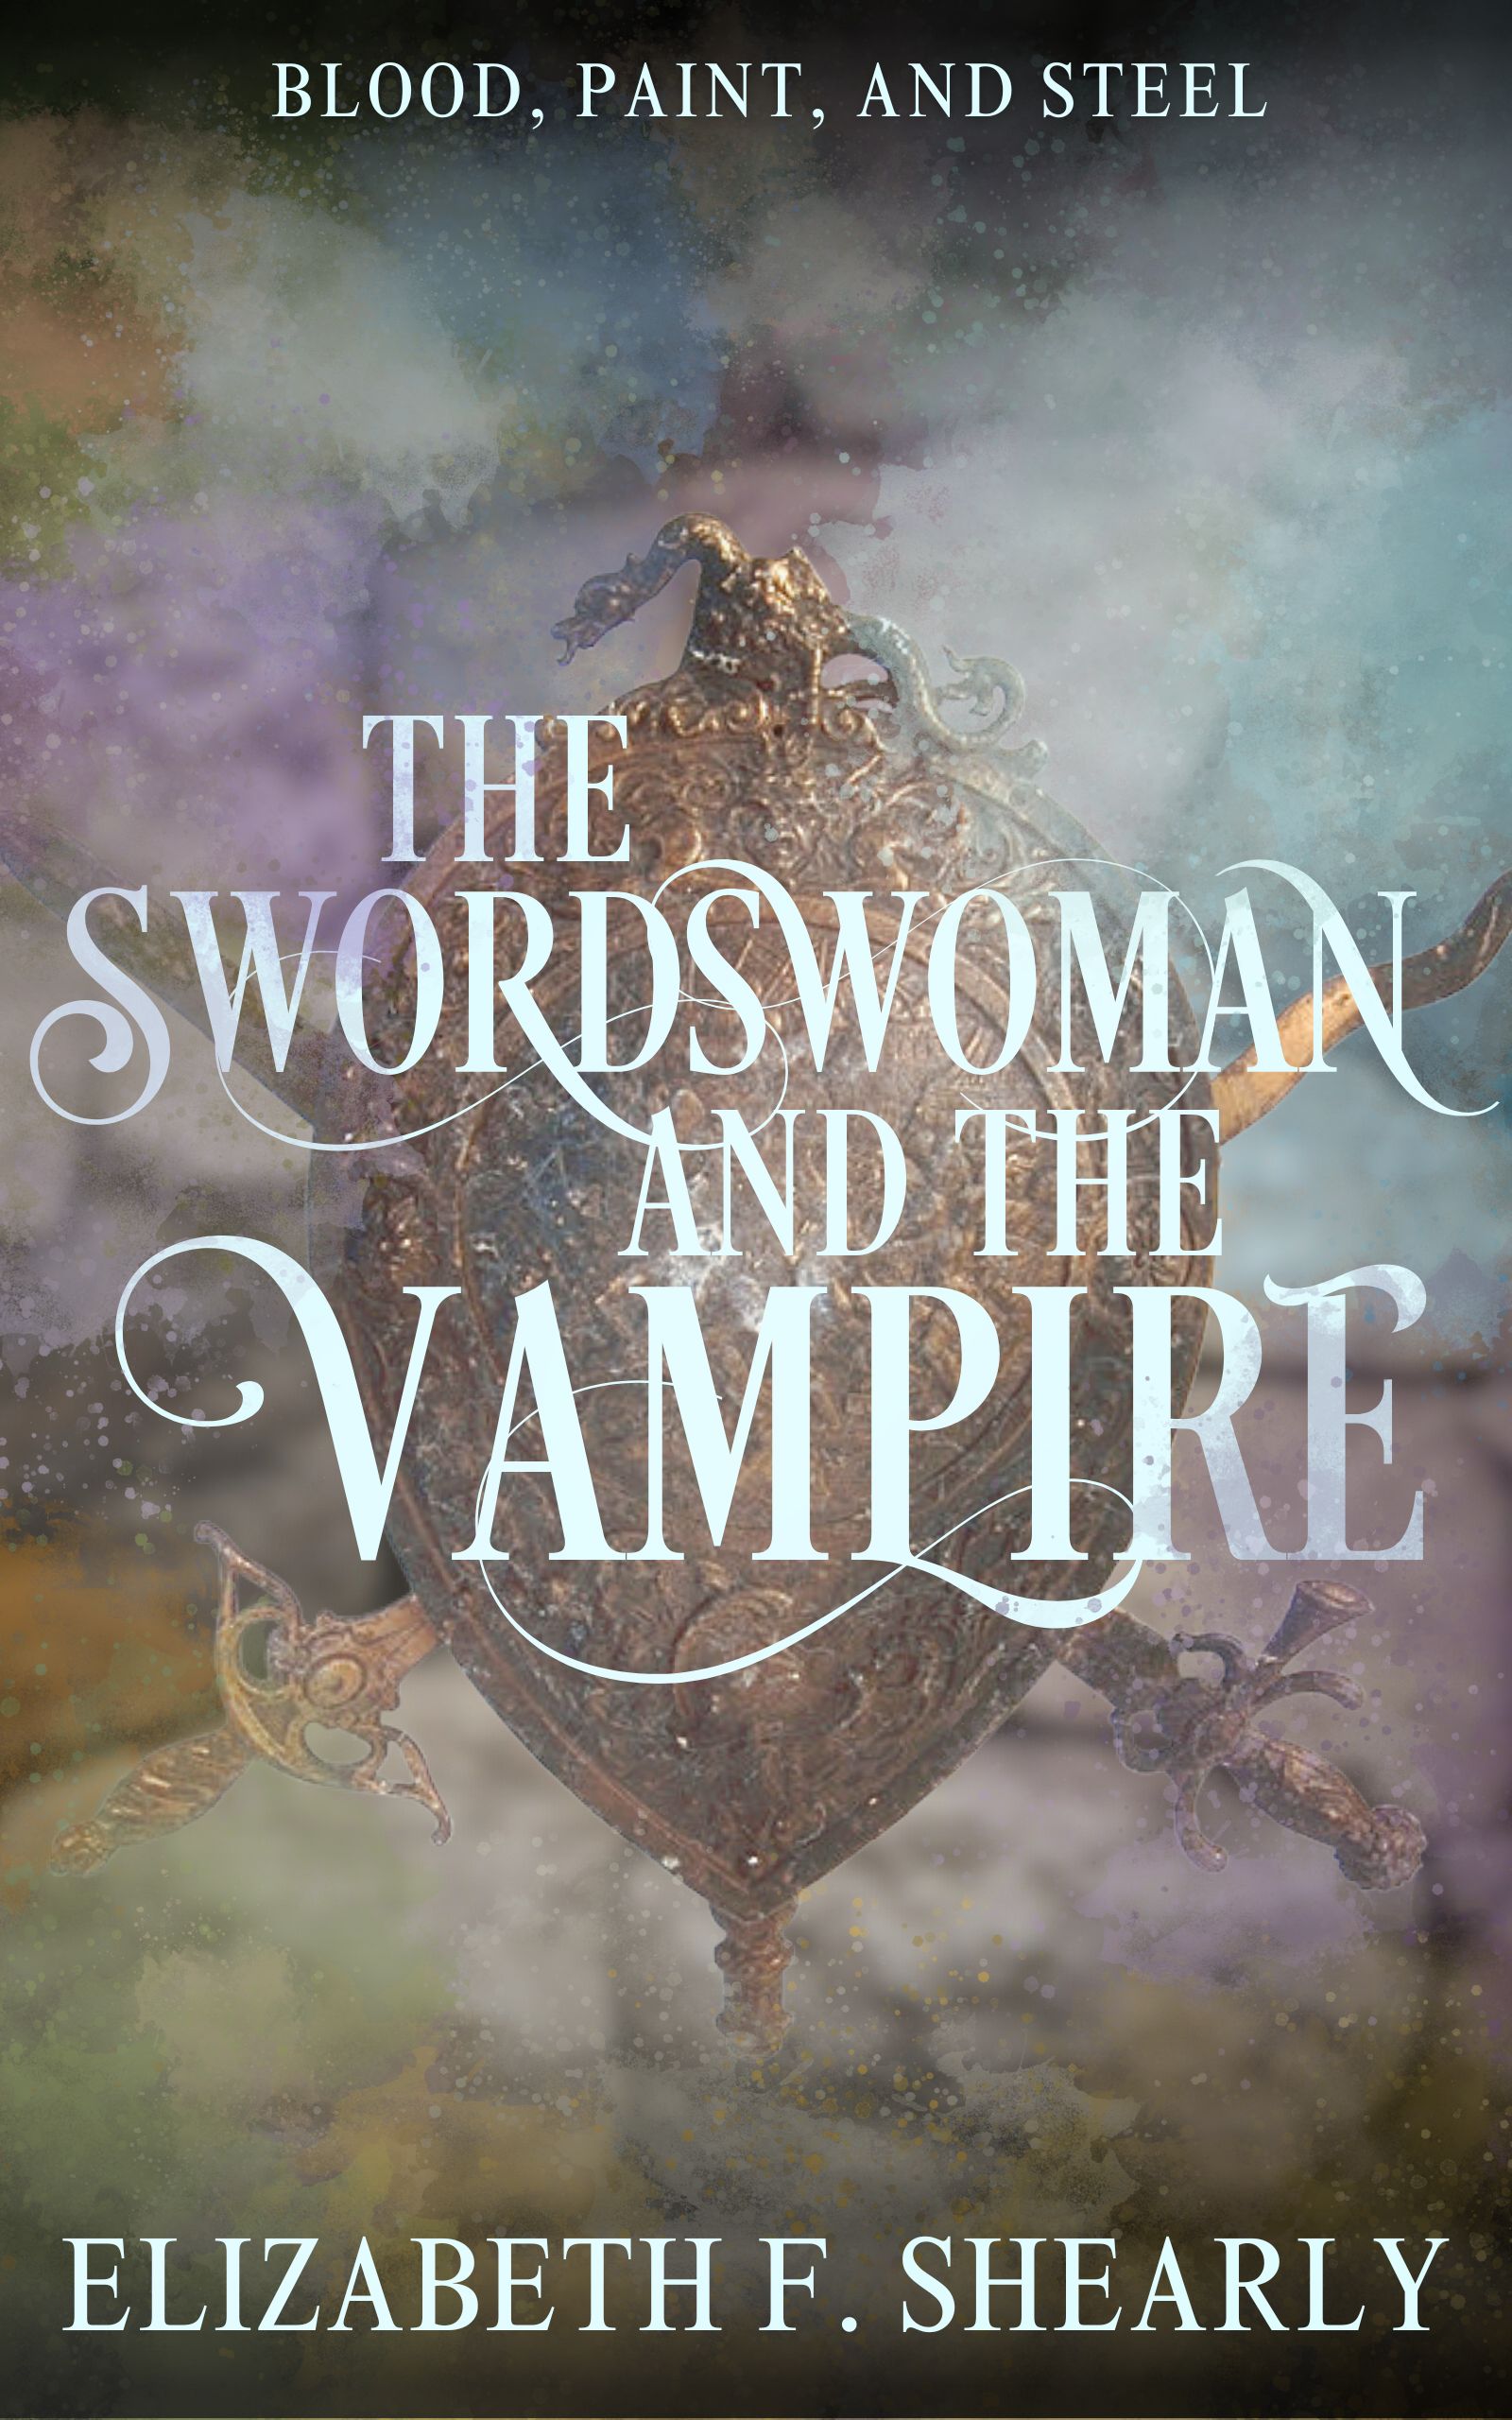 The Swordswoman and the Vampire by Elizabeth F. Shearly